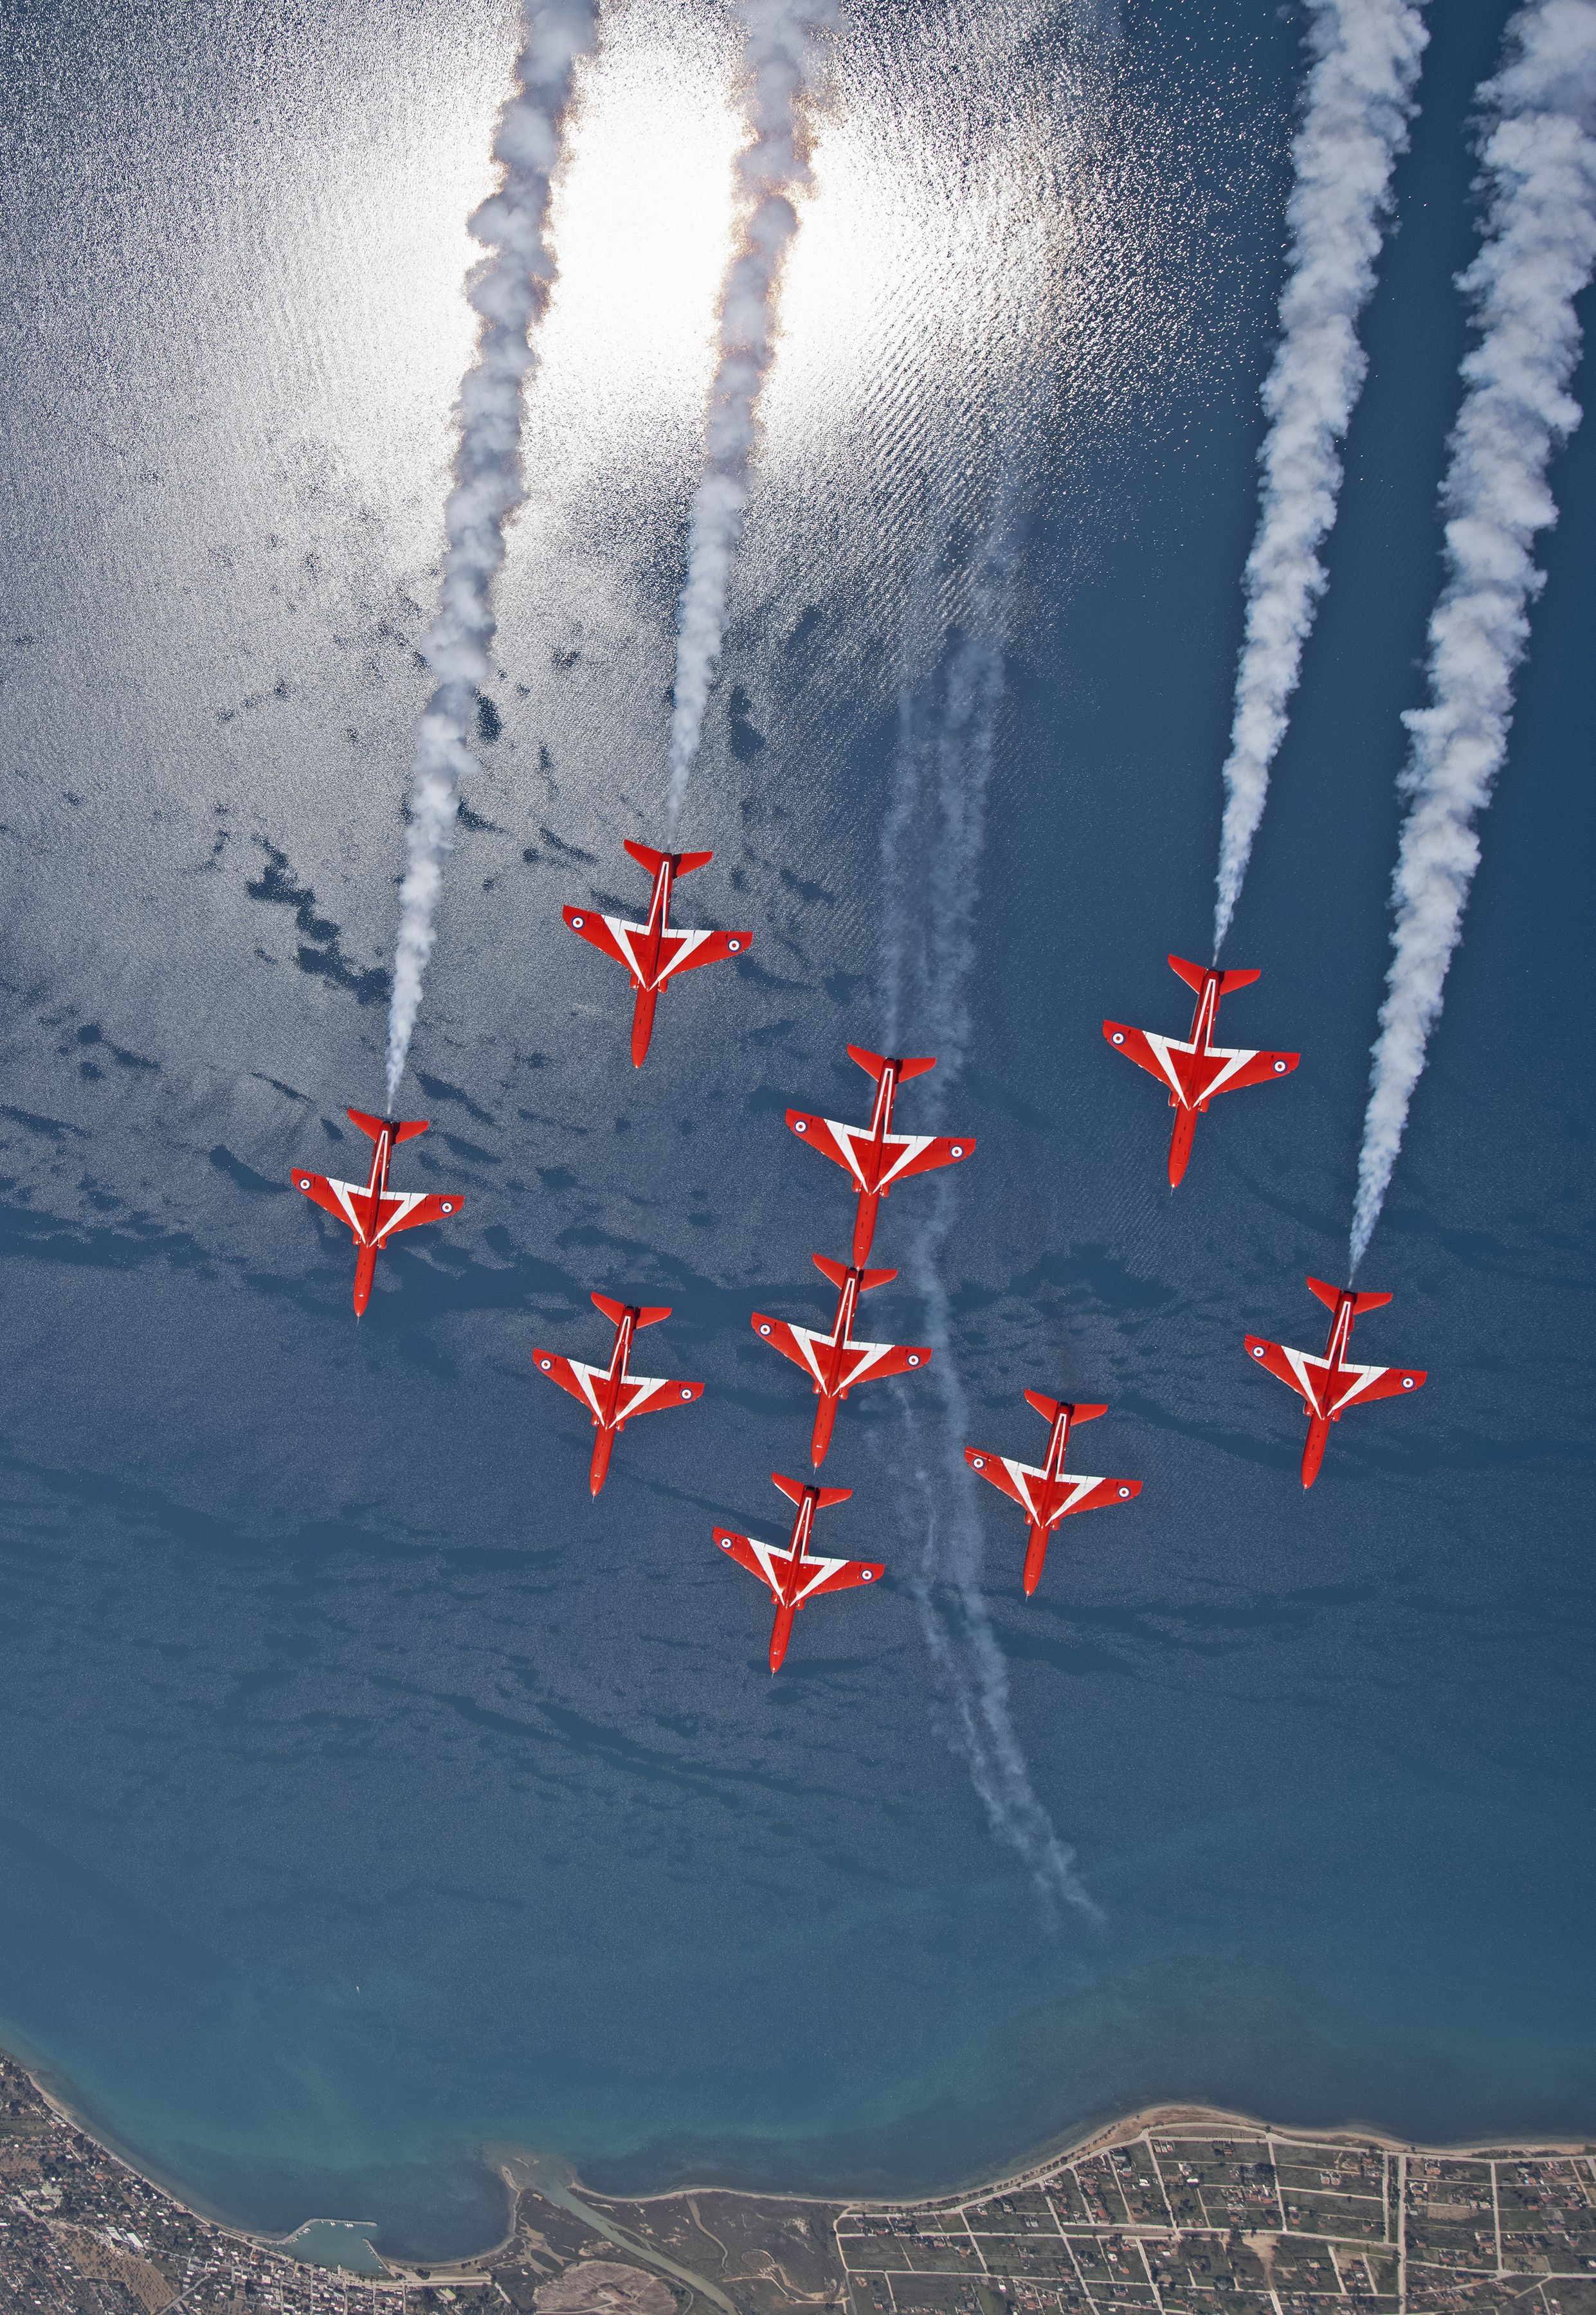 Red Arrows in formation over the water.